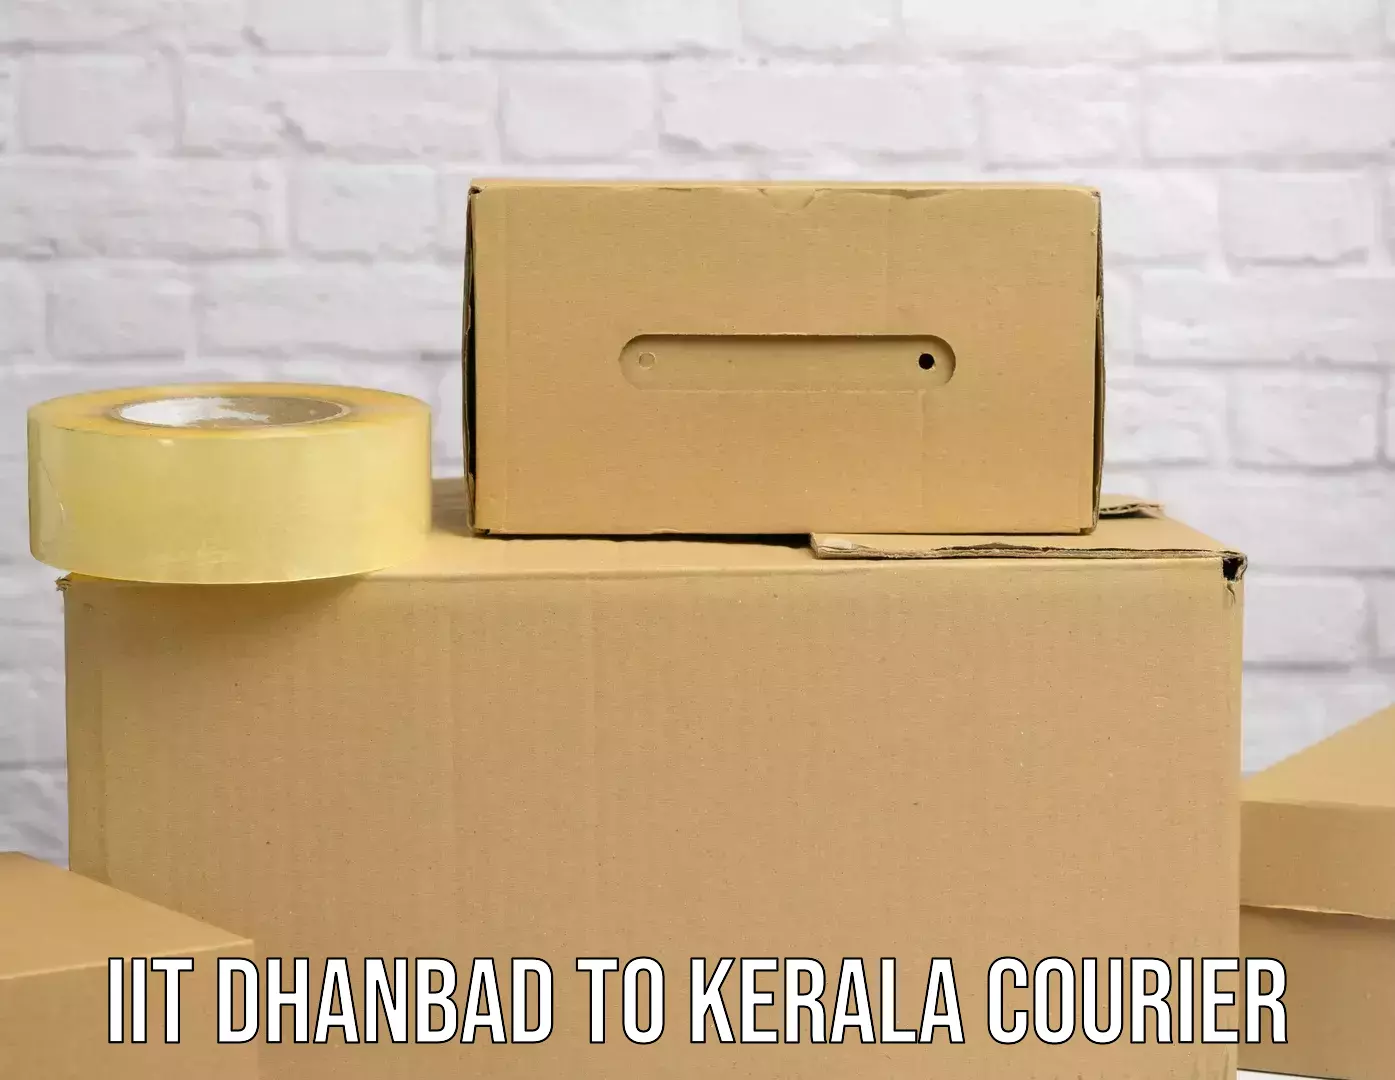 Pharmaceutical courier IIT Dhanbad to Palakkad